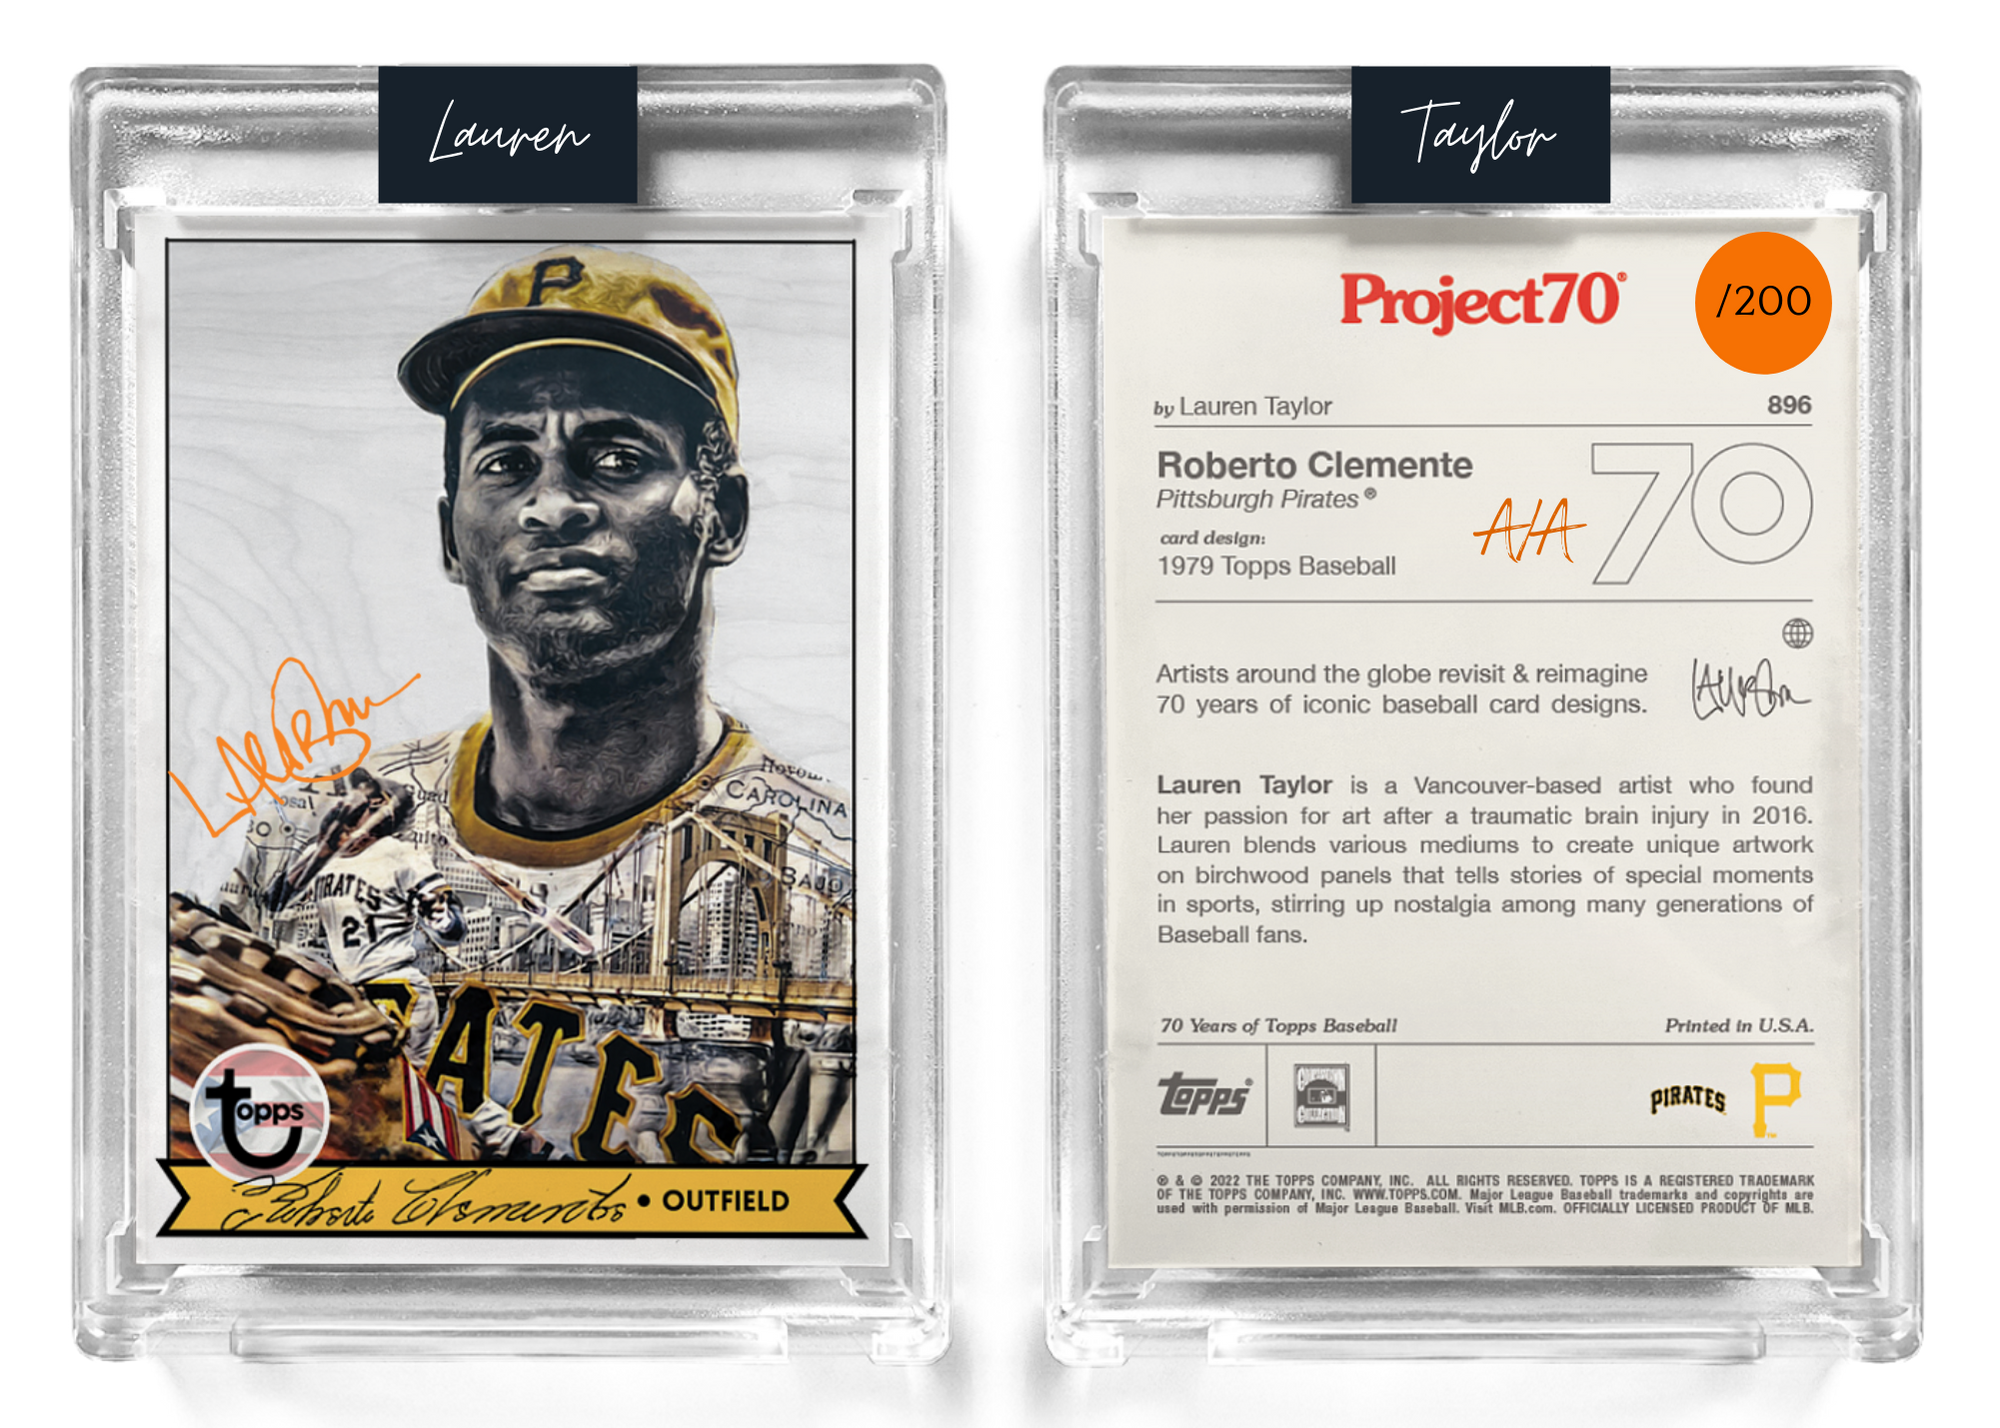 200 Orange Artist Signature - Topps Project 70 130pt card #896 by Lau